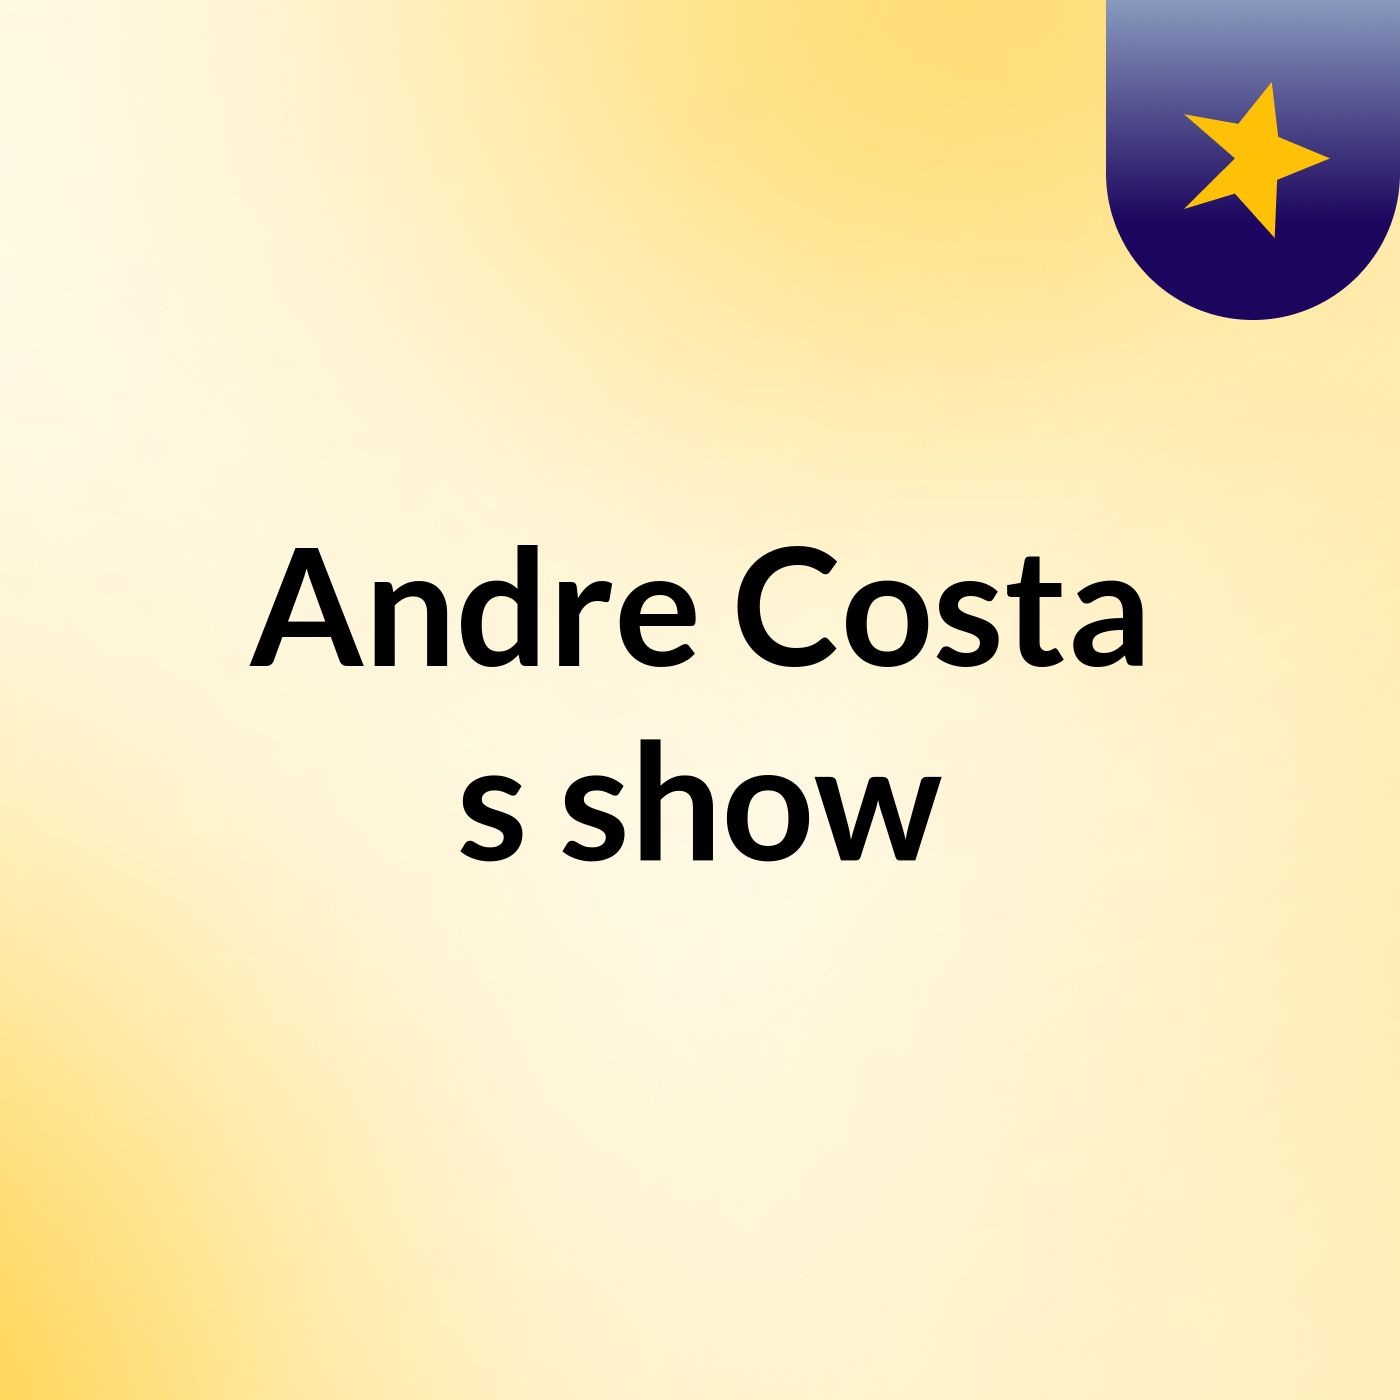 Andre Costa's show